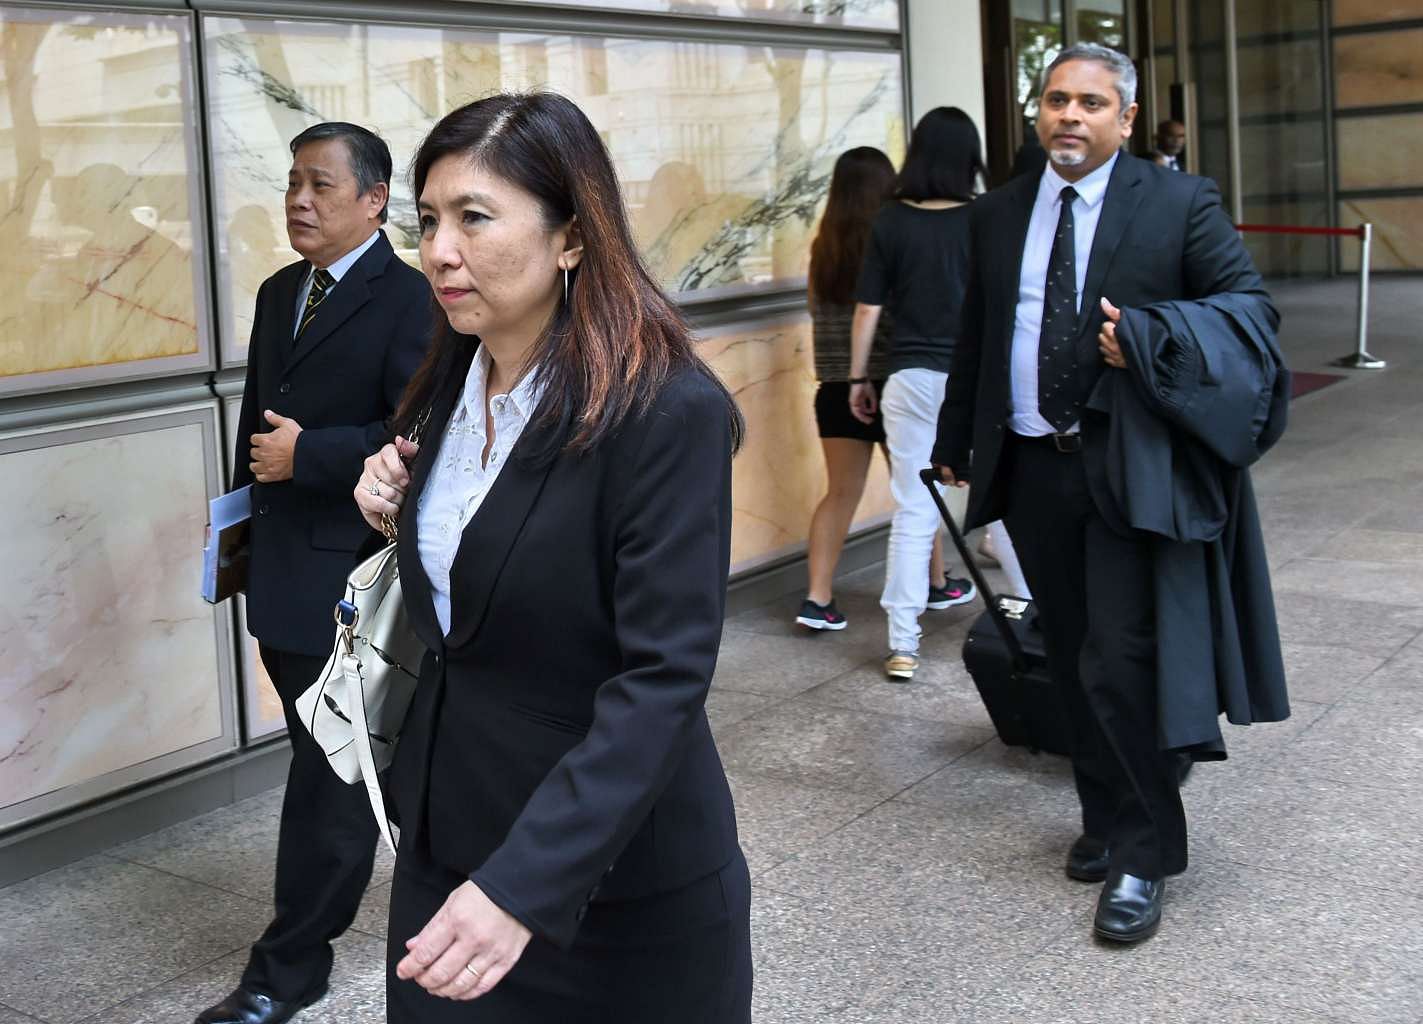 Lawyer Alfred Dodwell Apologises For Misleading Allegations Against Supreme Court Courts Crime News Top Stories The Straits Times